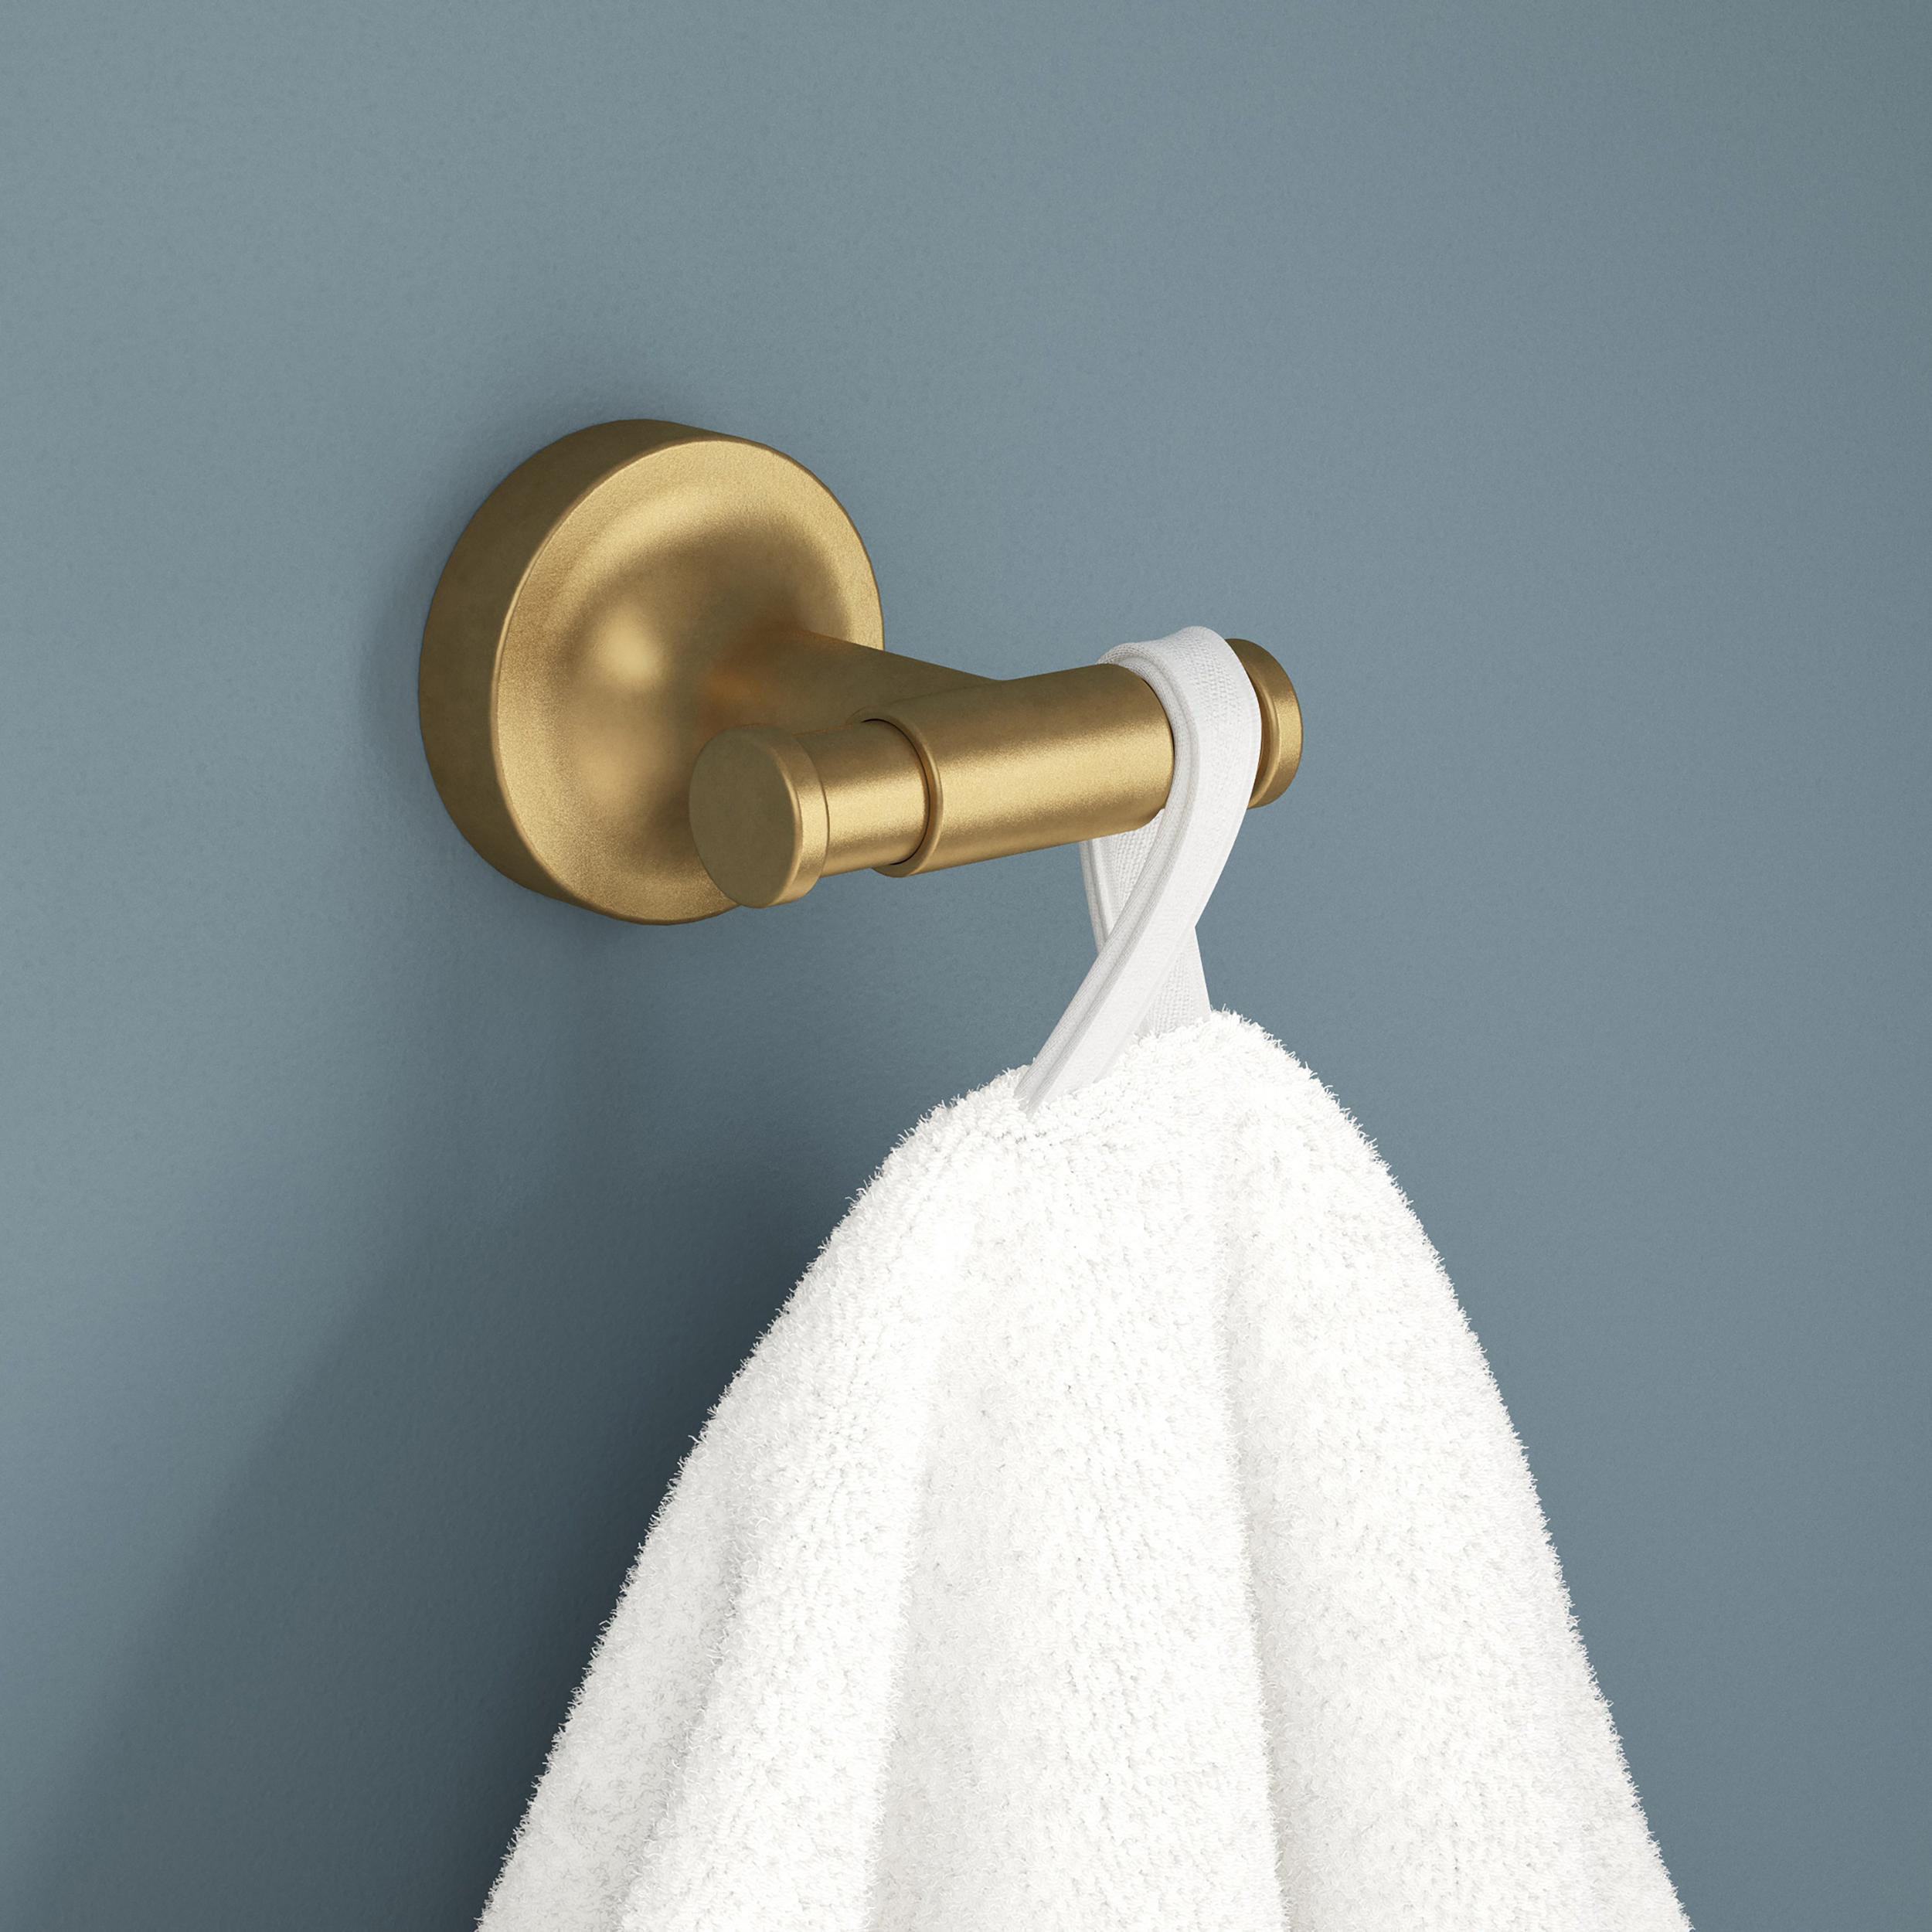 Franklin Brass Voisin Double Towel Hook Bath Hardware Accessory in Satin  Gold & Reviews